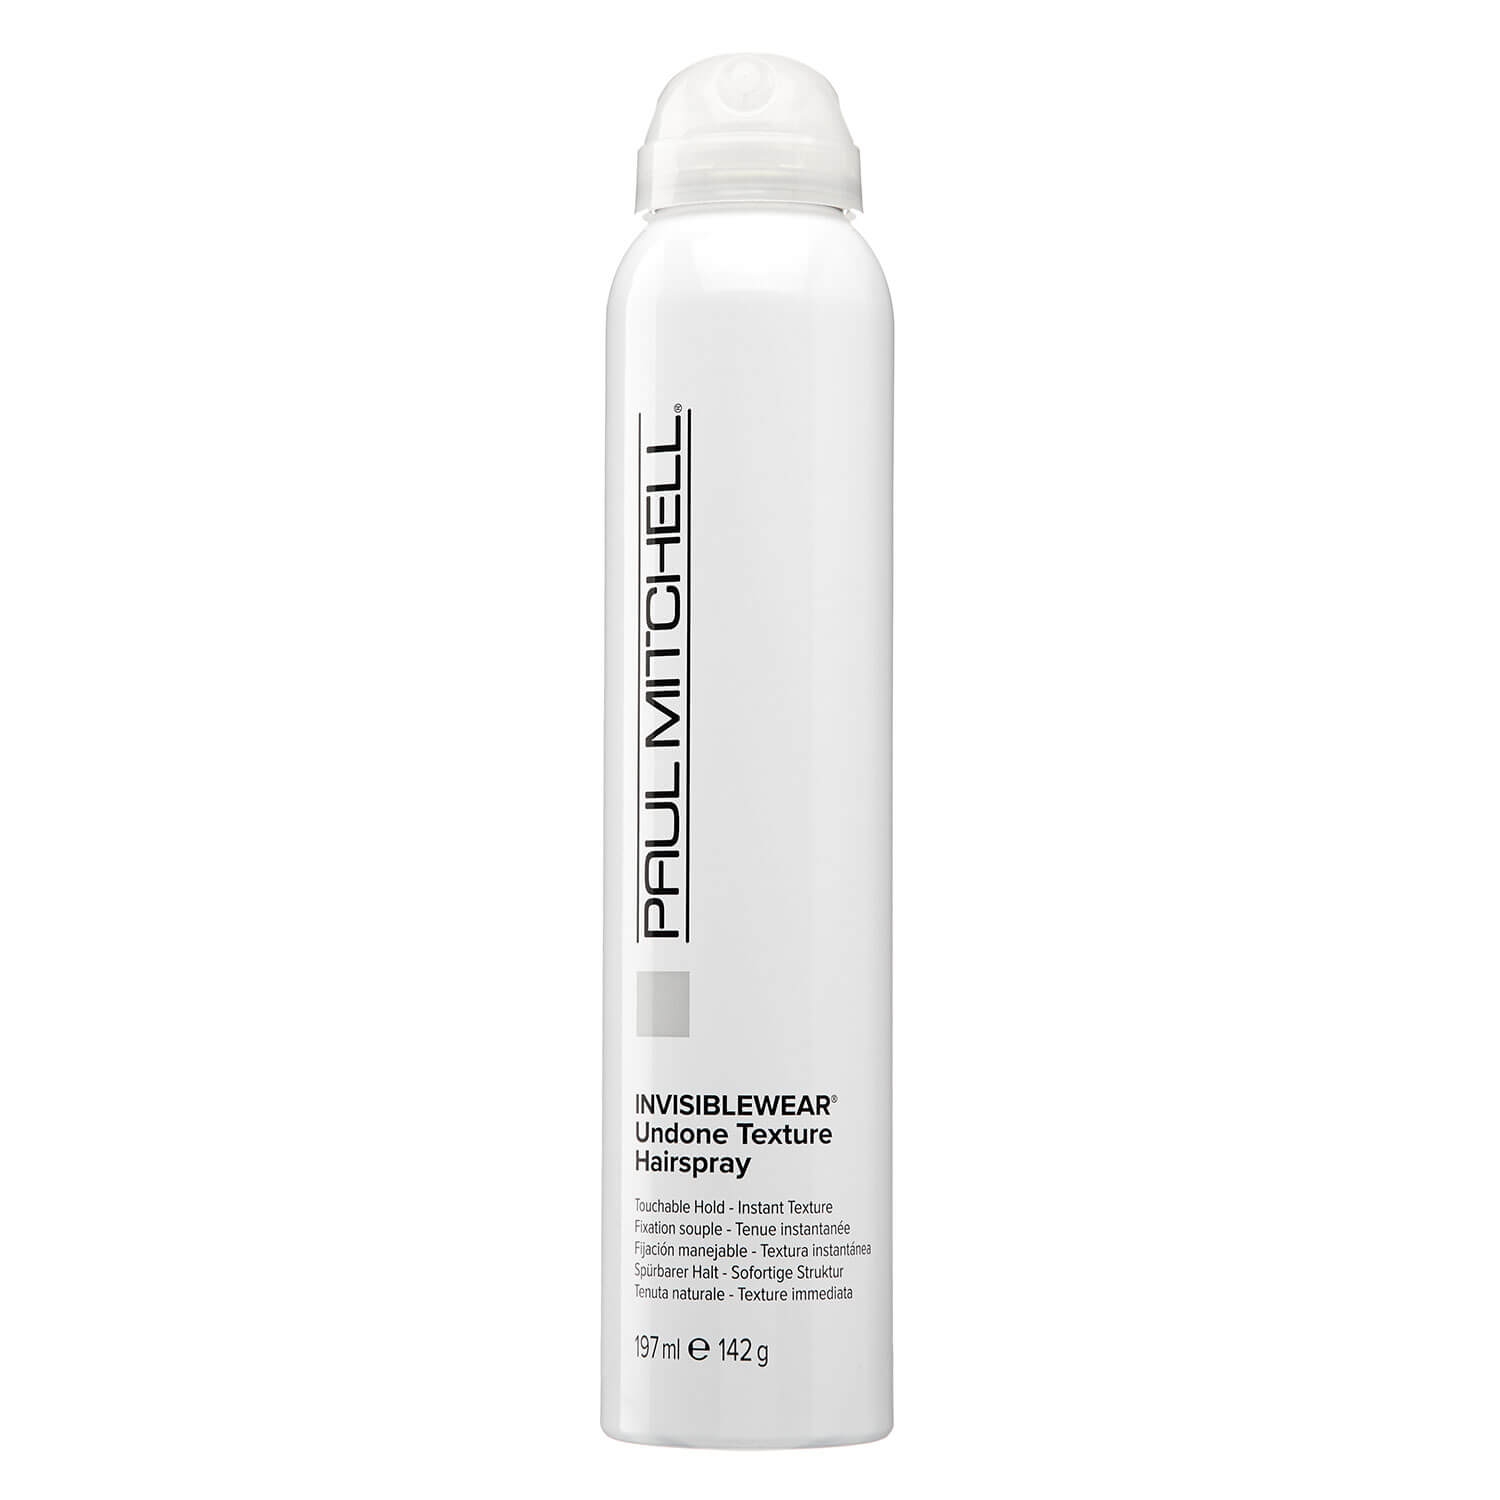 Product image from Invisiblewear - Undone Texture Hairspray